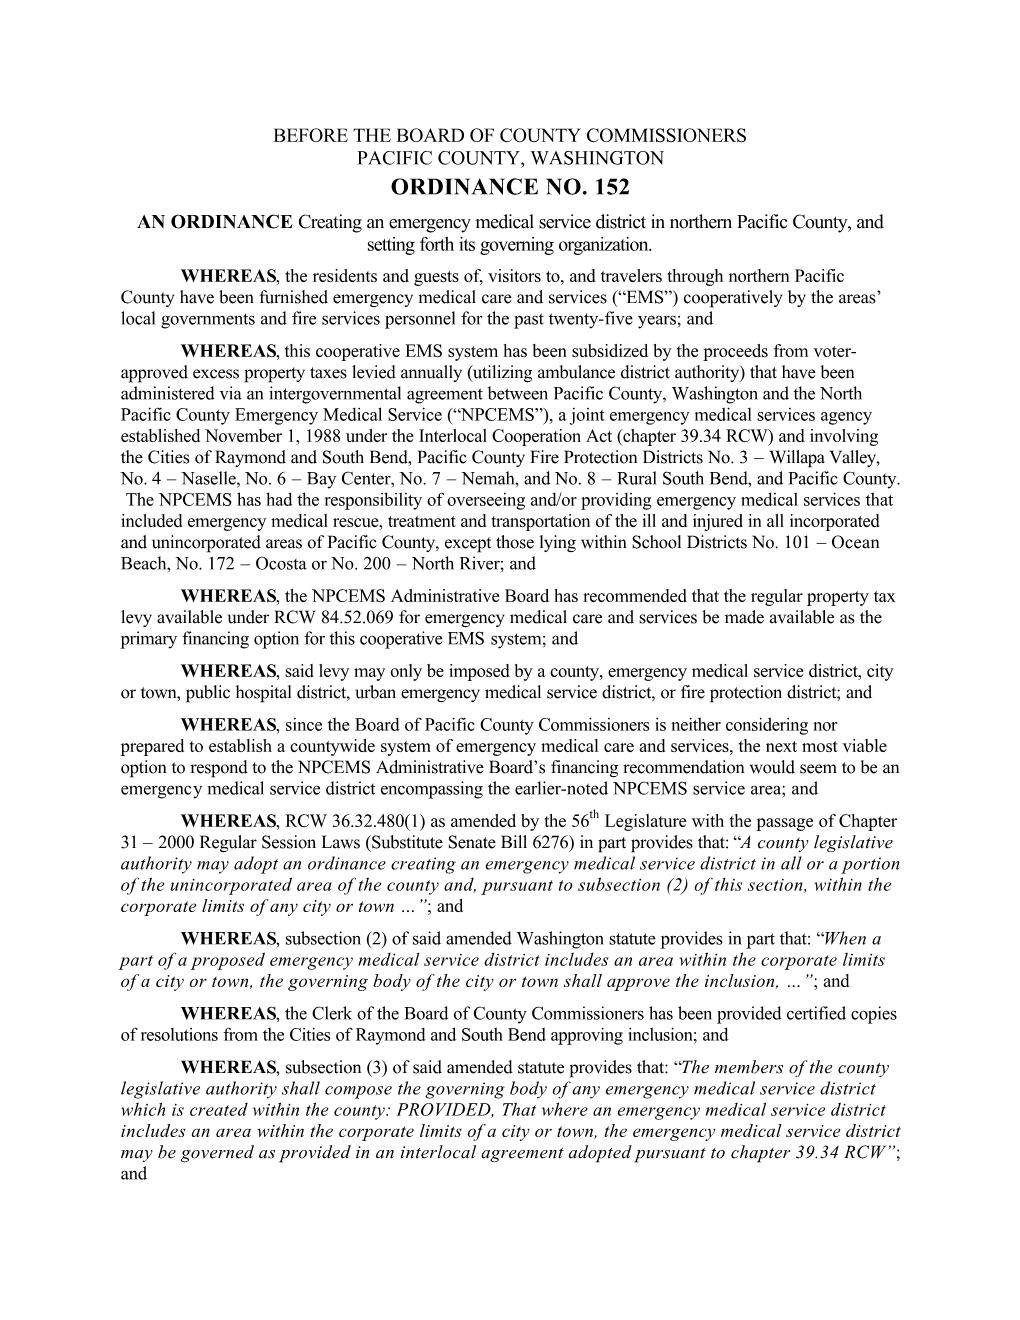 ORDINANCE NO. 152 an ORDINANCE Creating an Emergency Medical Service District in Northern Pacific County, and Setting Forth Its Governing Organization